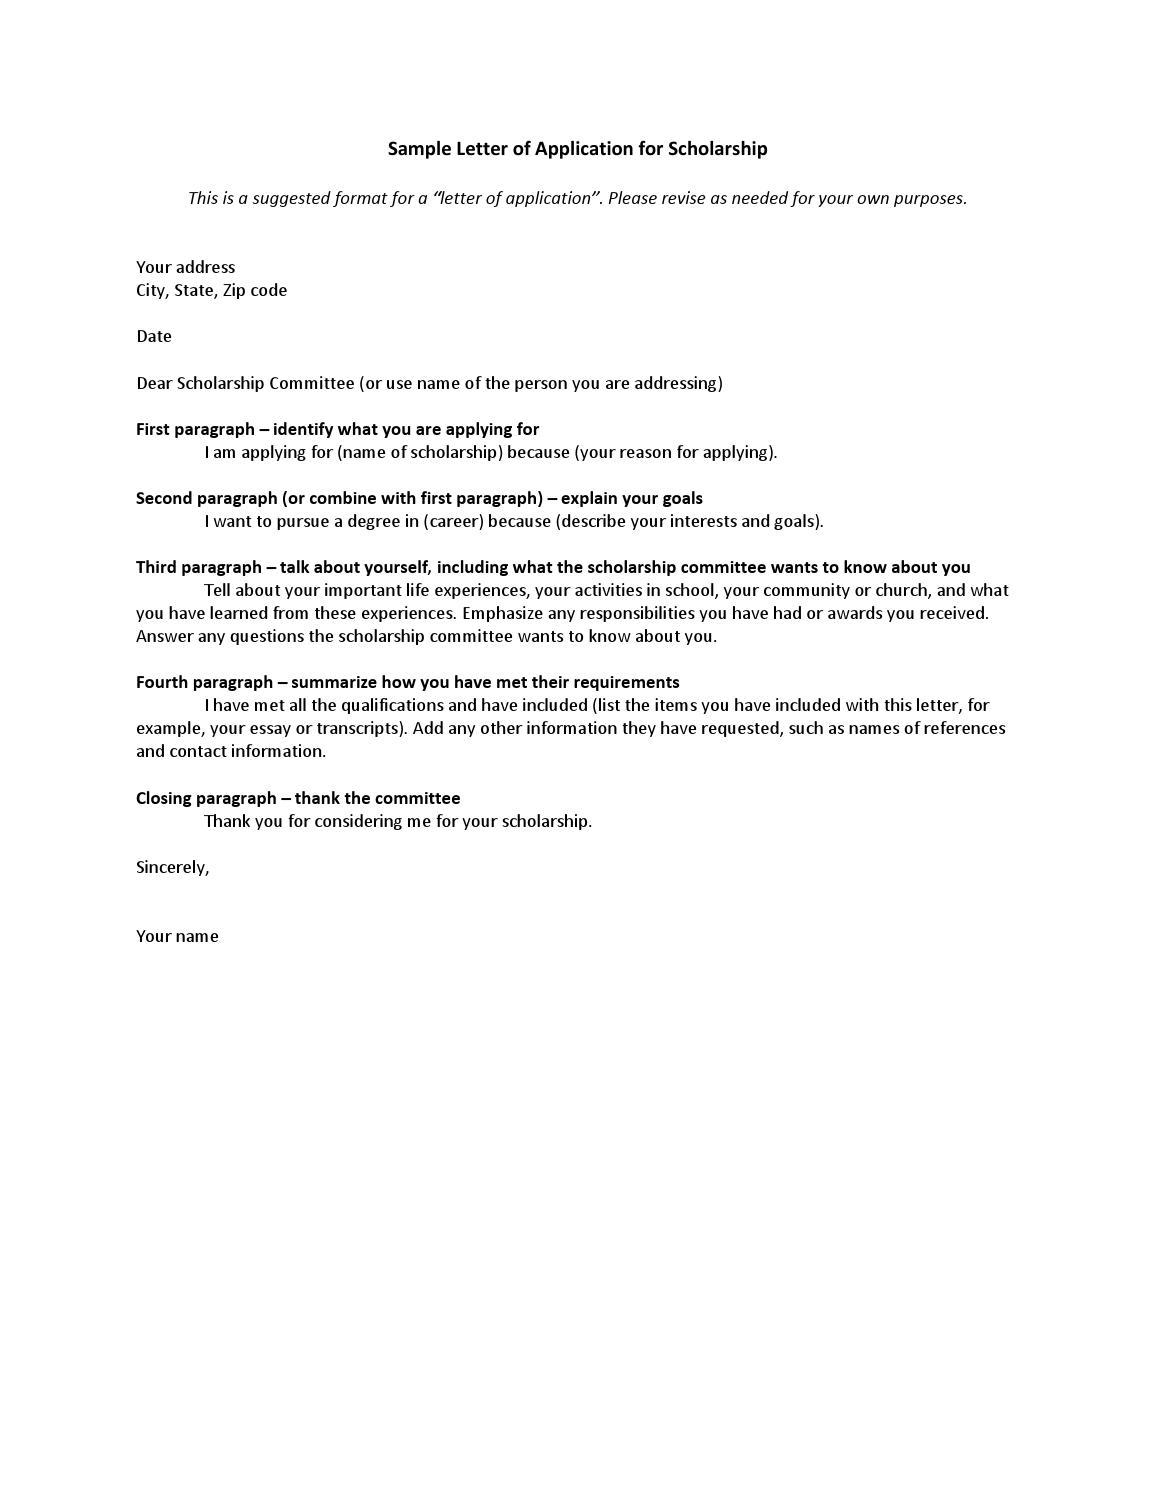 Sample Letter Of Application For Scholarship Miss Gia within measurements 1156 X 1496